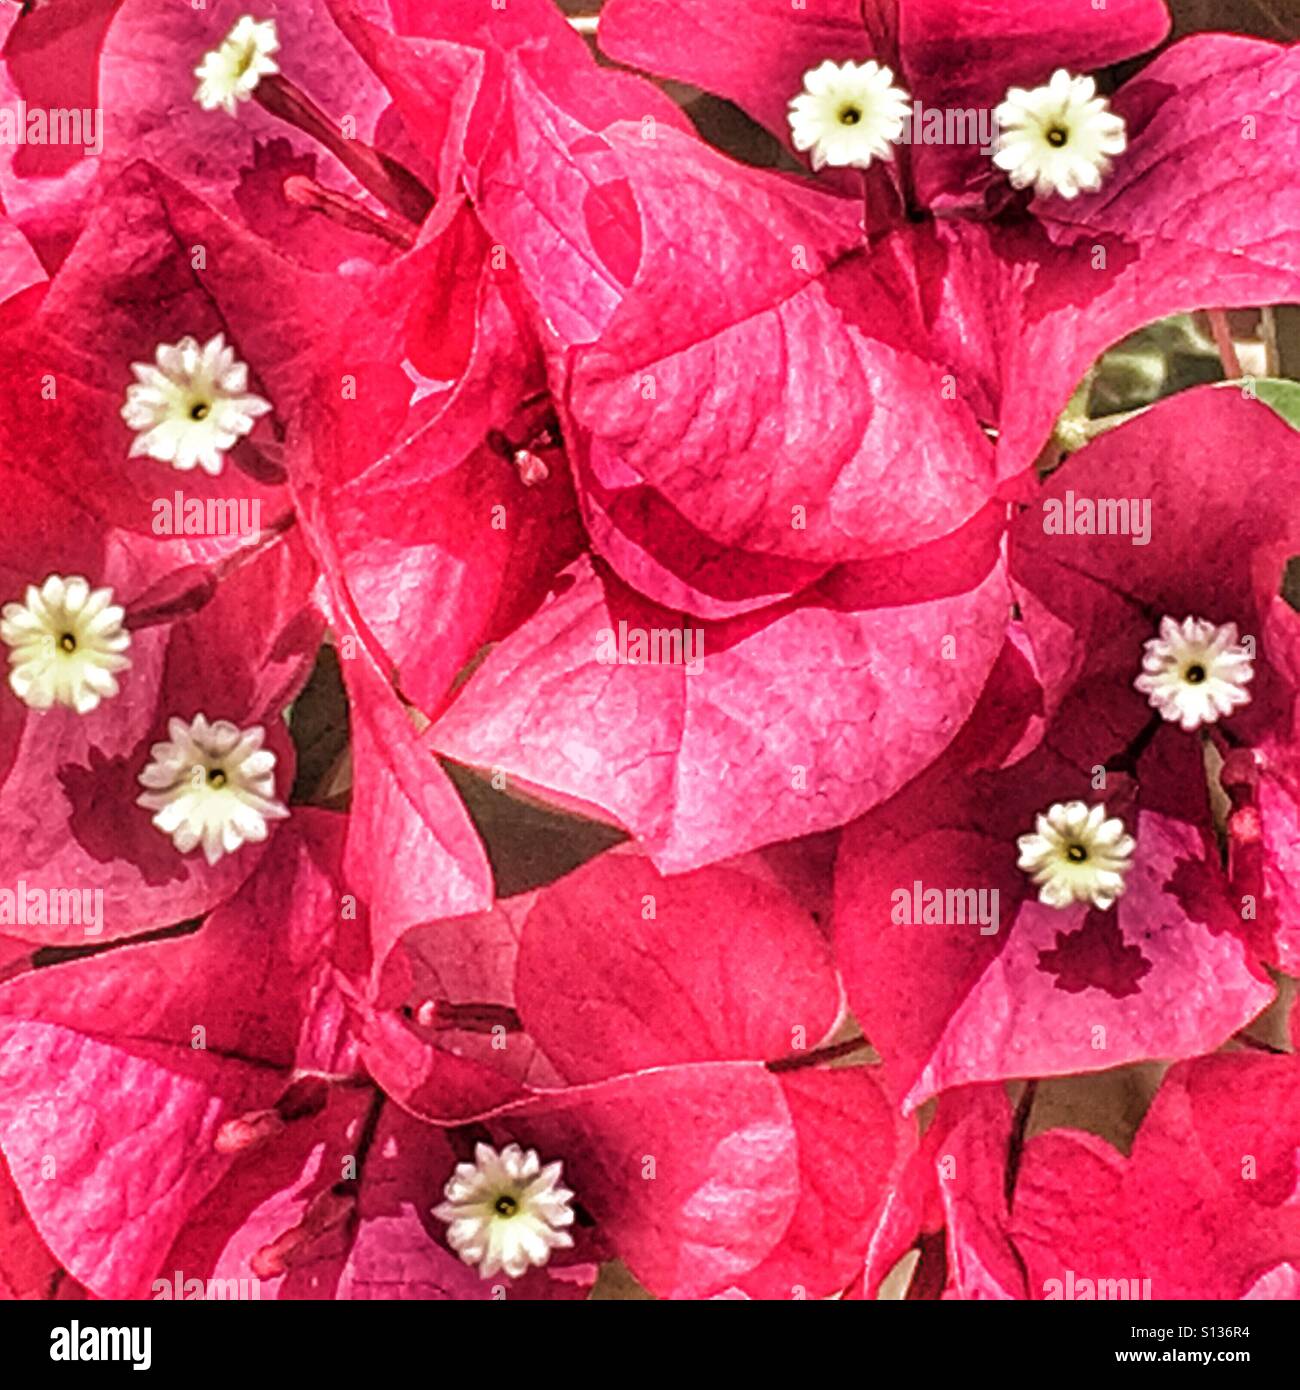 Bougainvillea, bracts and flowers Stock Photo